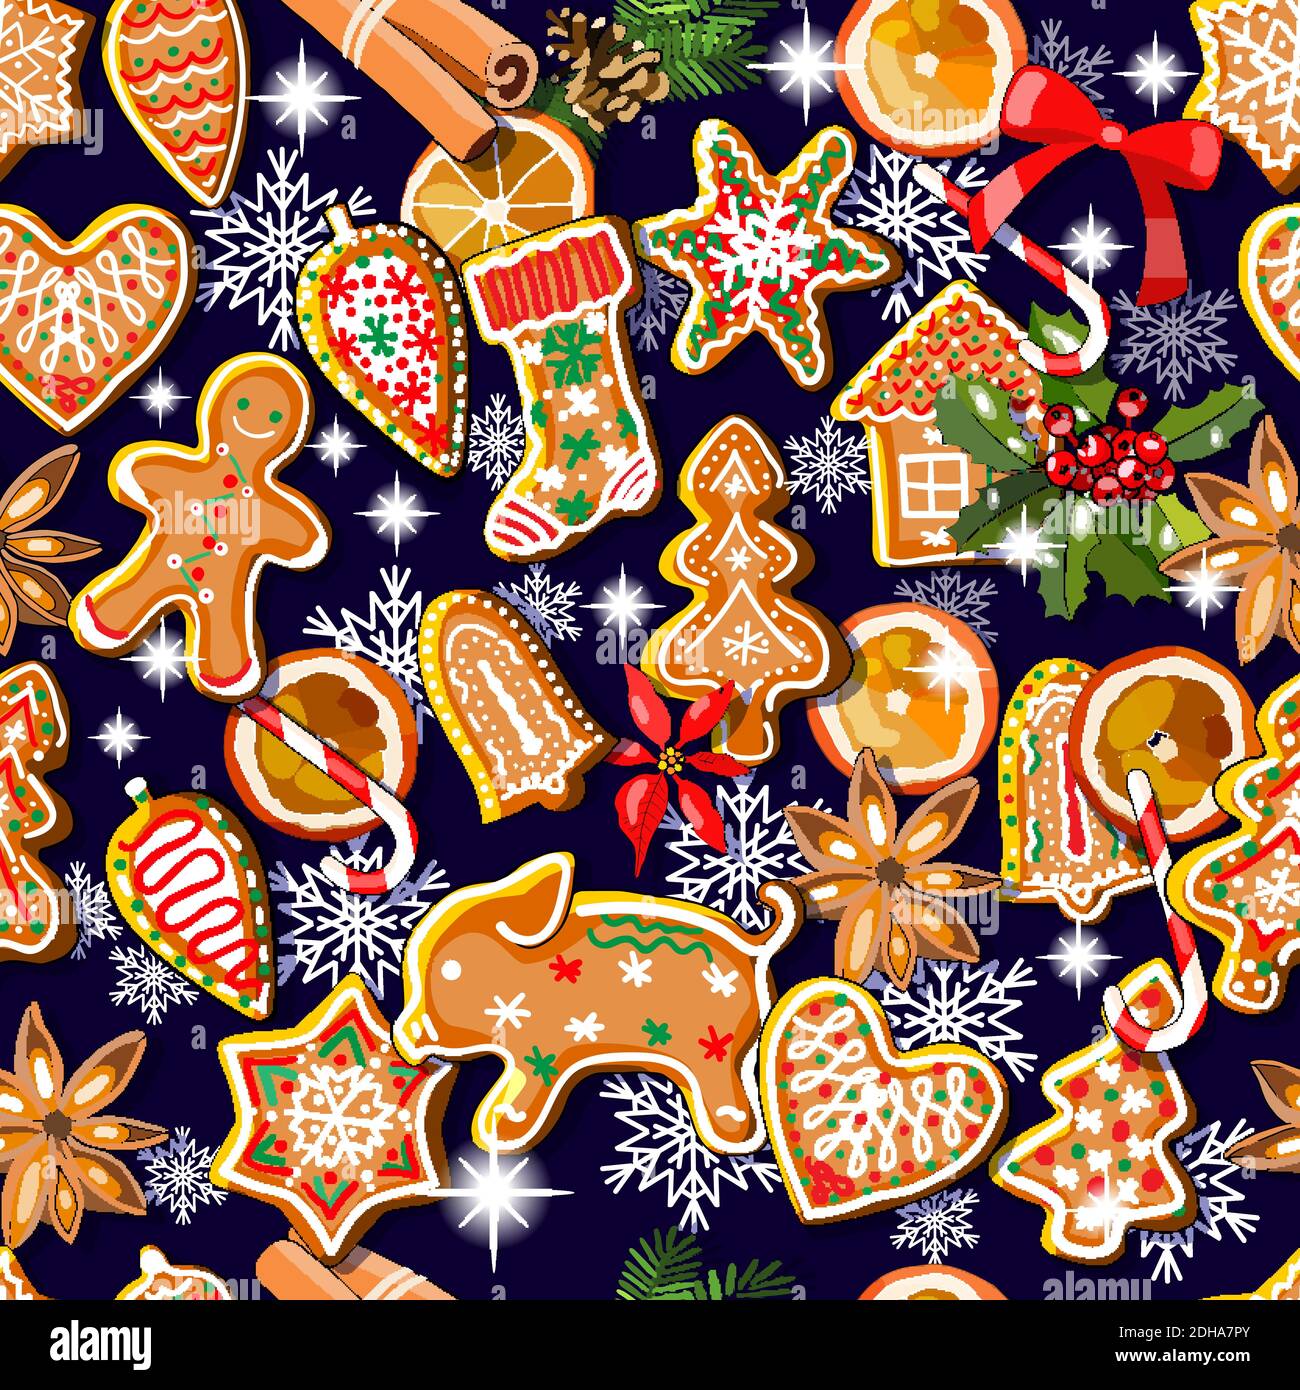 Endless texture with traditional Christmas symbols. Seamless vector pattern for your festive design, fabrics, wallpapers, greeting cards, wrappings. Stock Vector